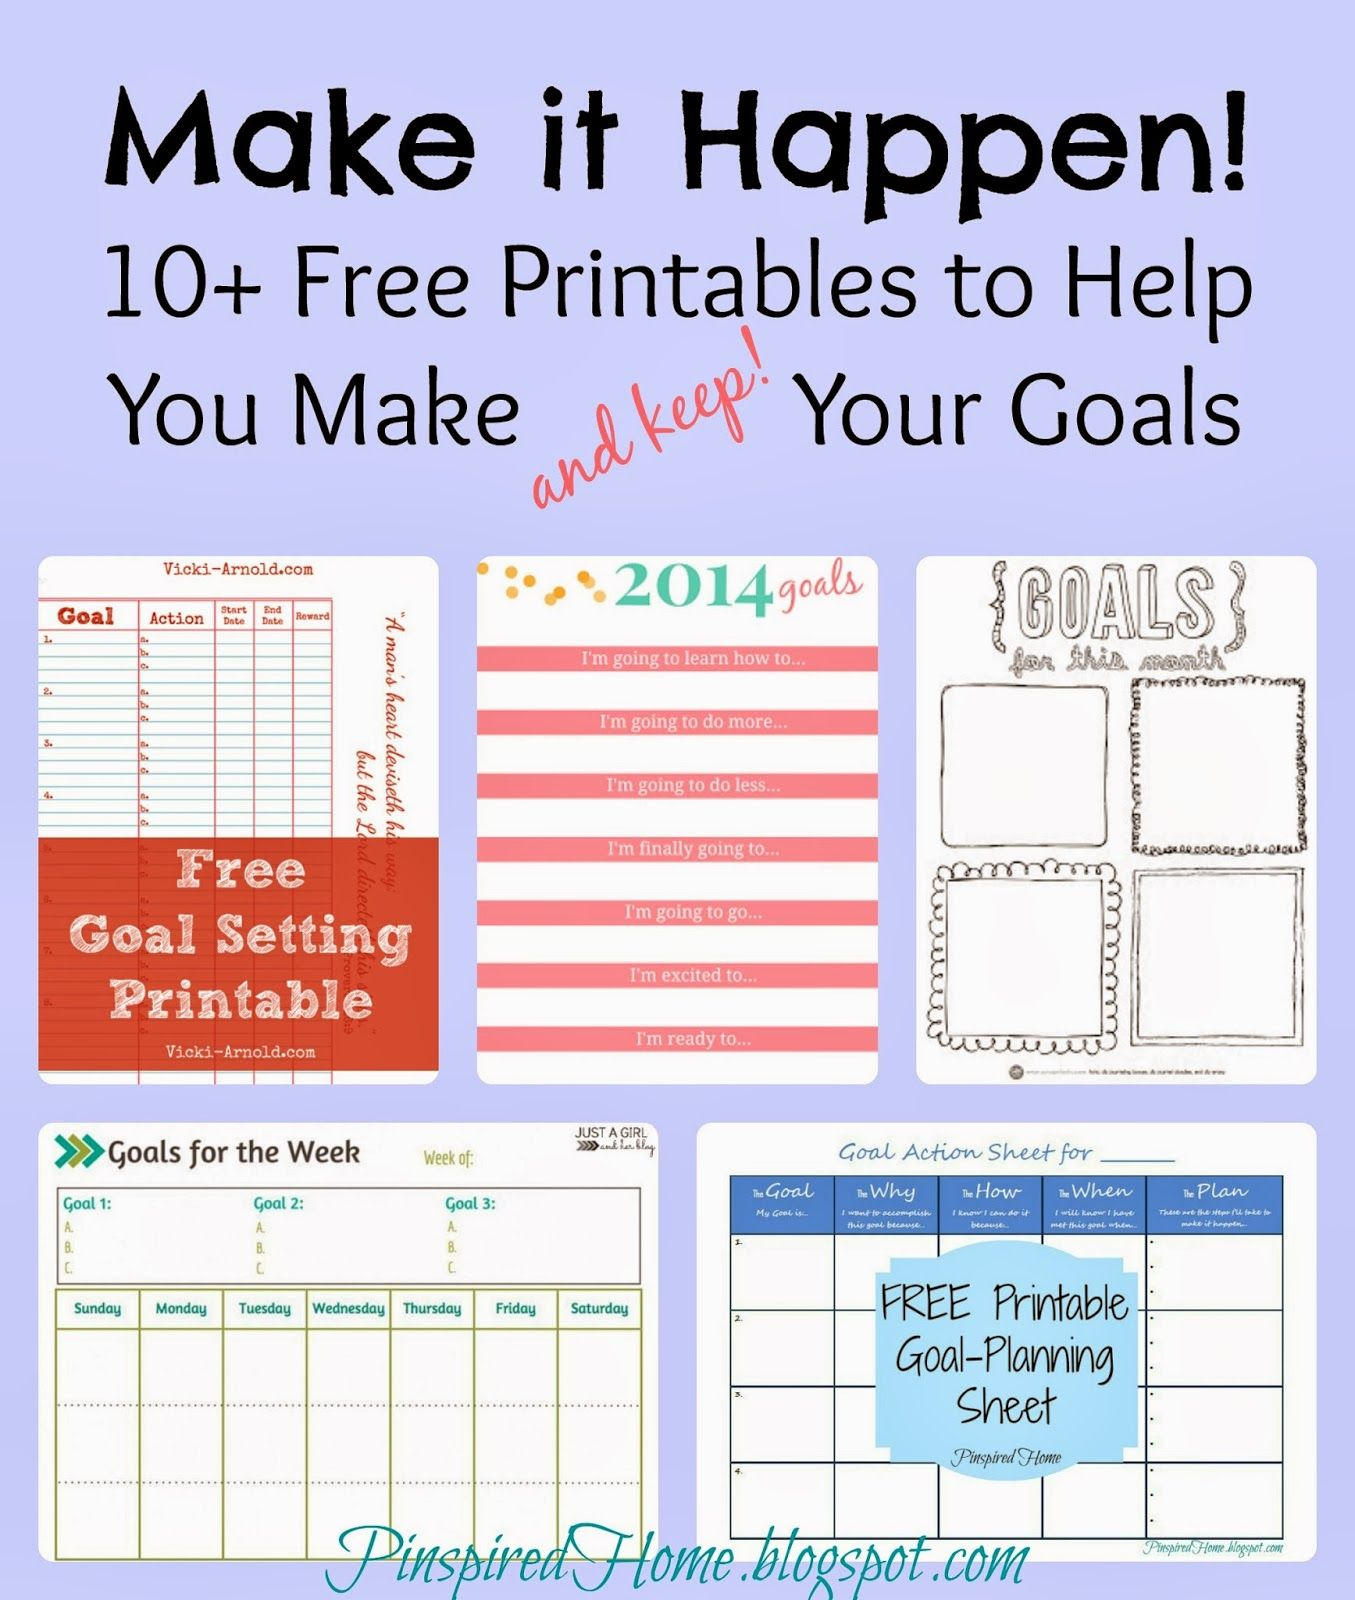 Make It Happen: 10 Free Printables To Help You Meet Your Goals - Free Printable Home Organizer Notebook